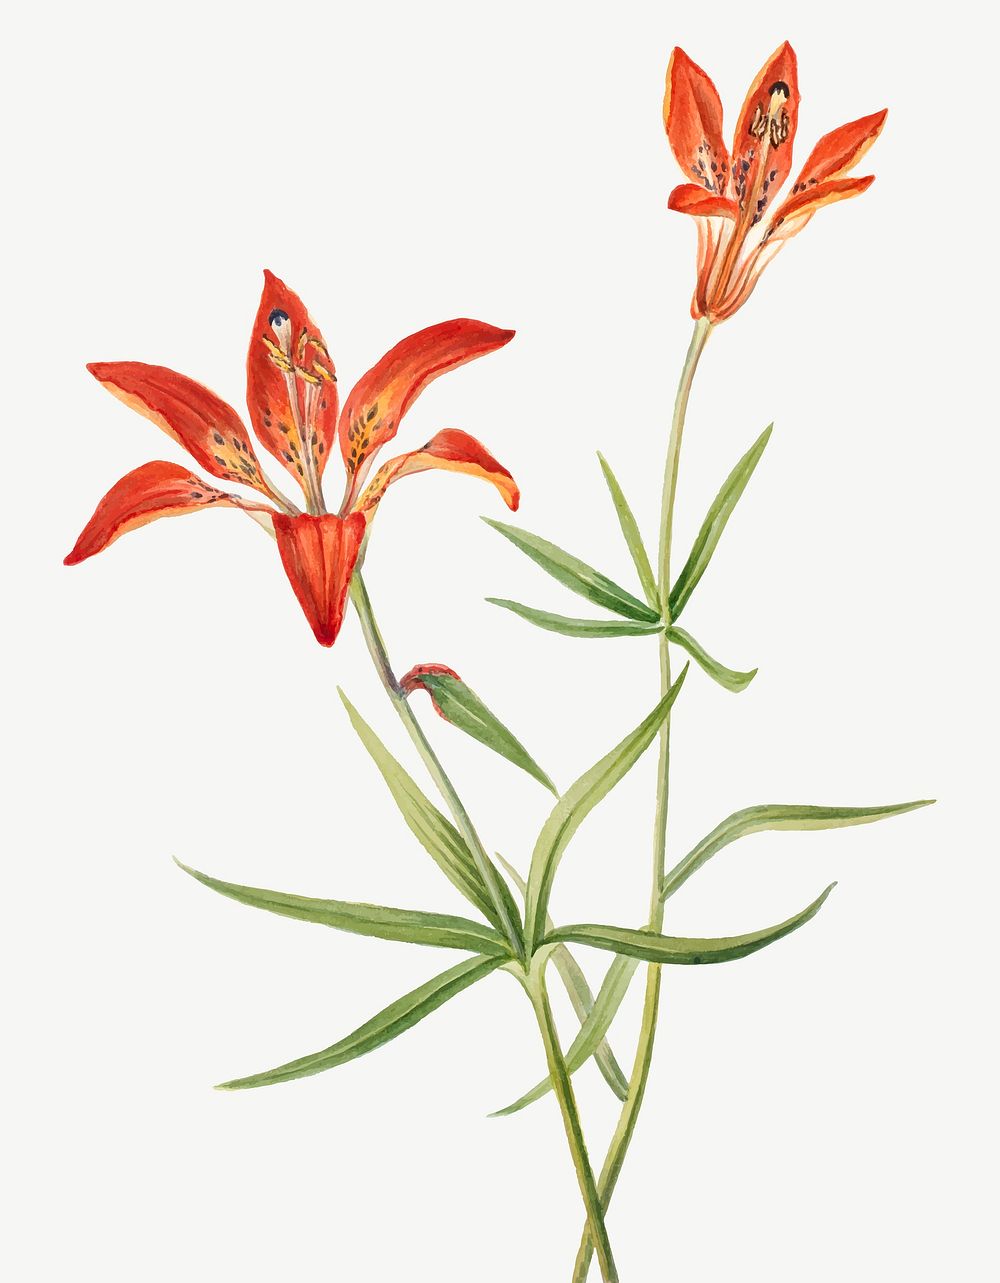 Red lily blossom vector illustration hand drawn, remixed from the artworks by Mary Vaux Walcott